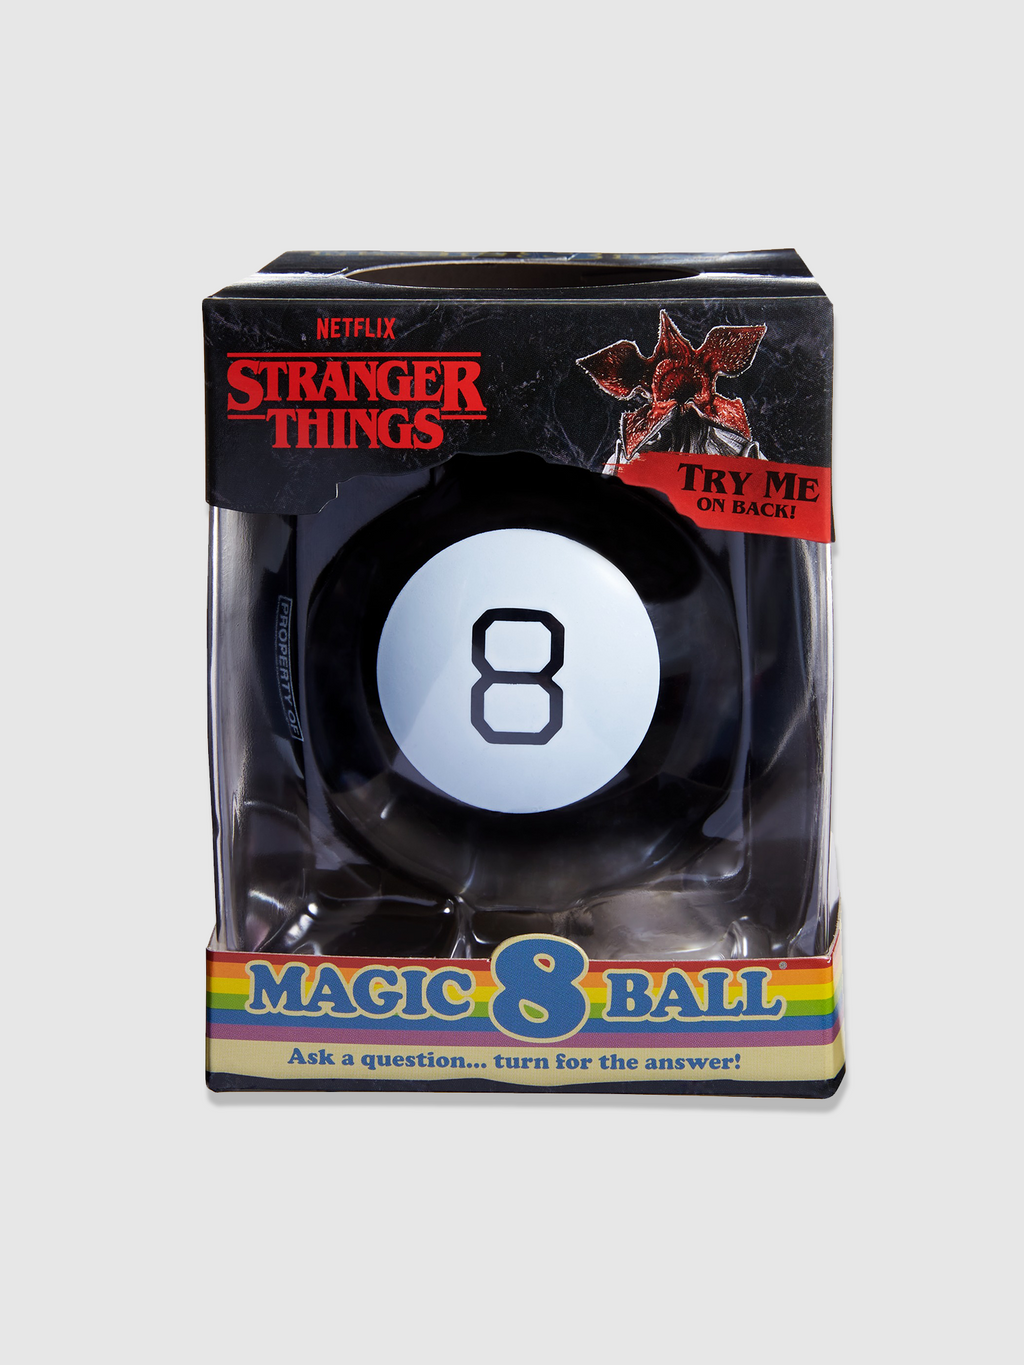 MAGIC ORB BALL EIGHT 8 BALL ANSWERS QUESTIONS PARTY GAME GIFT